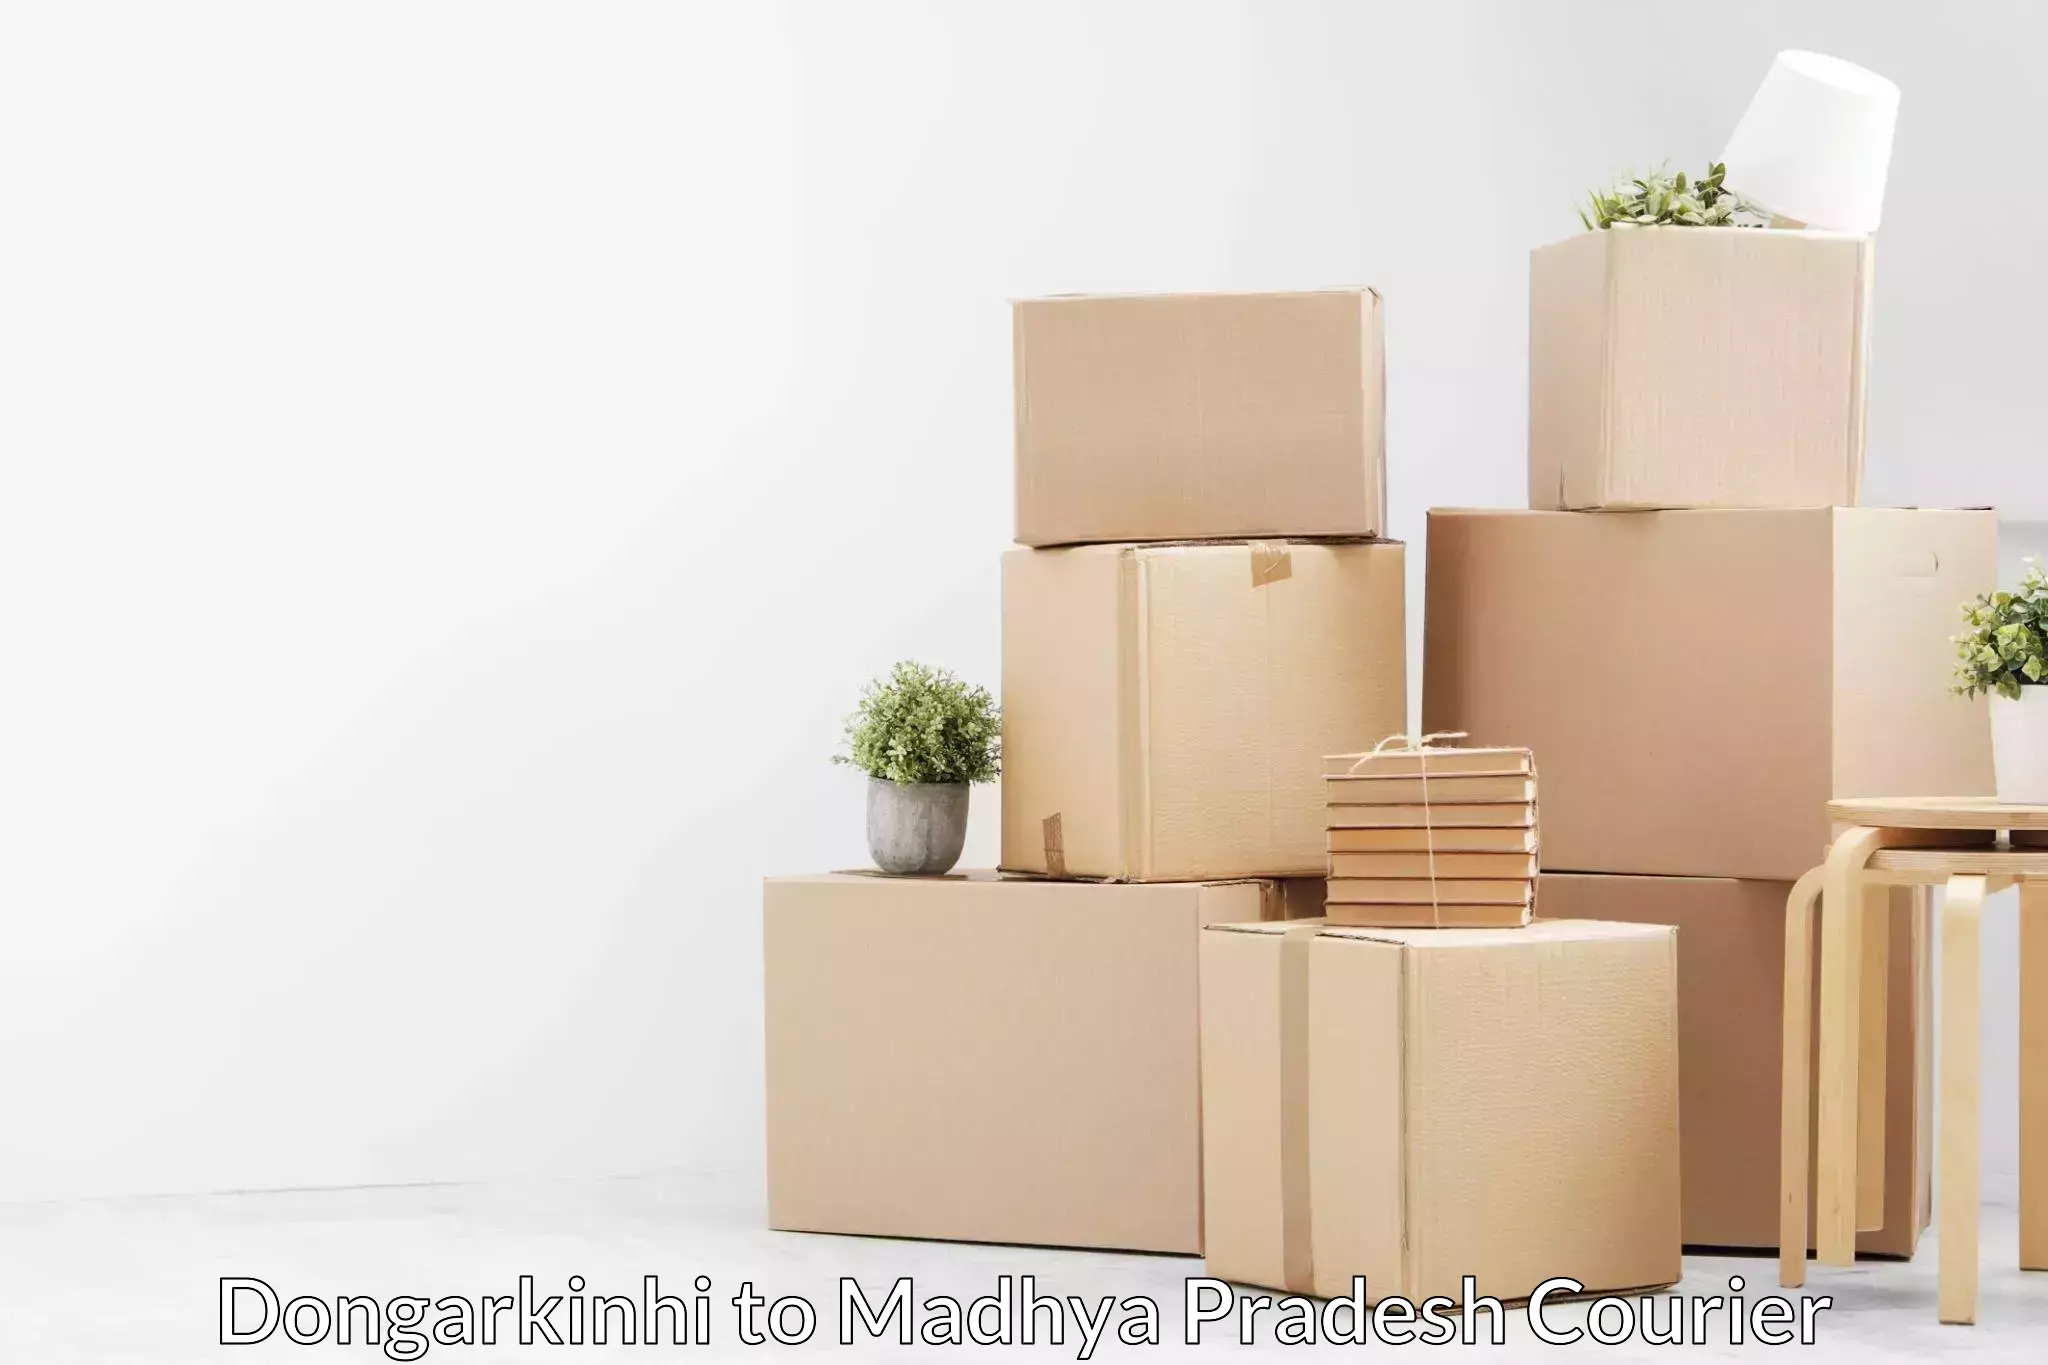 Efficient moving services Dongarkinhi to Shujalpur